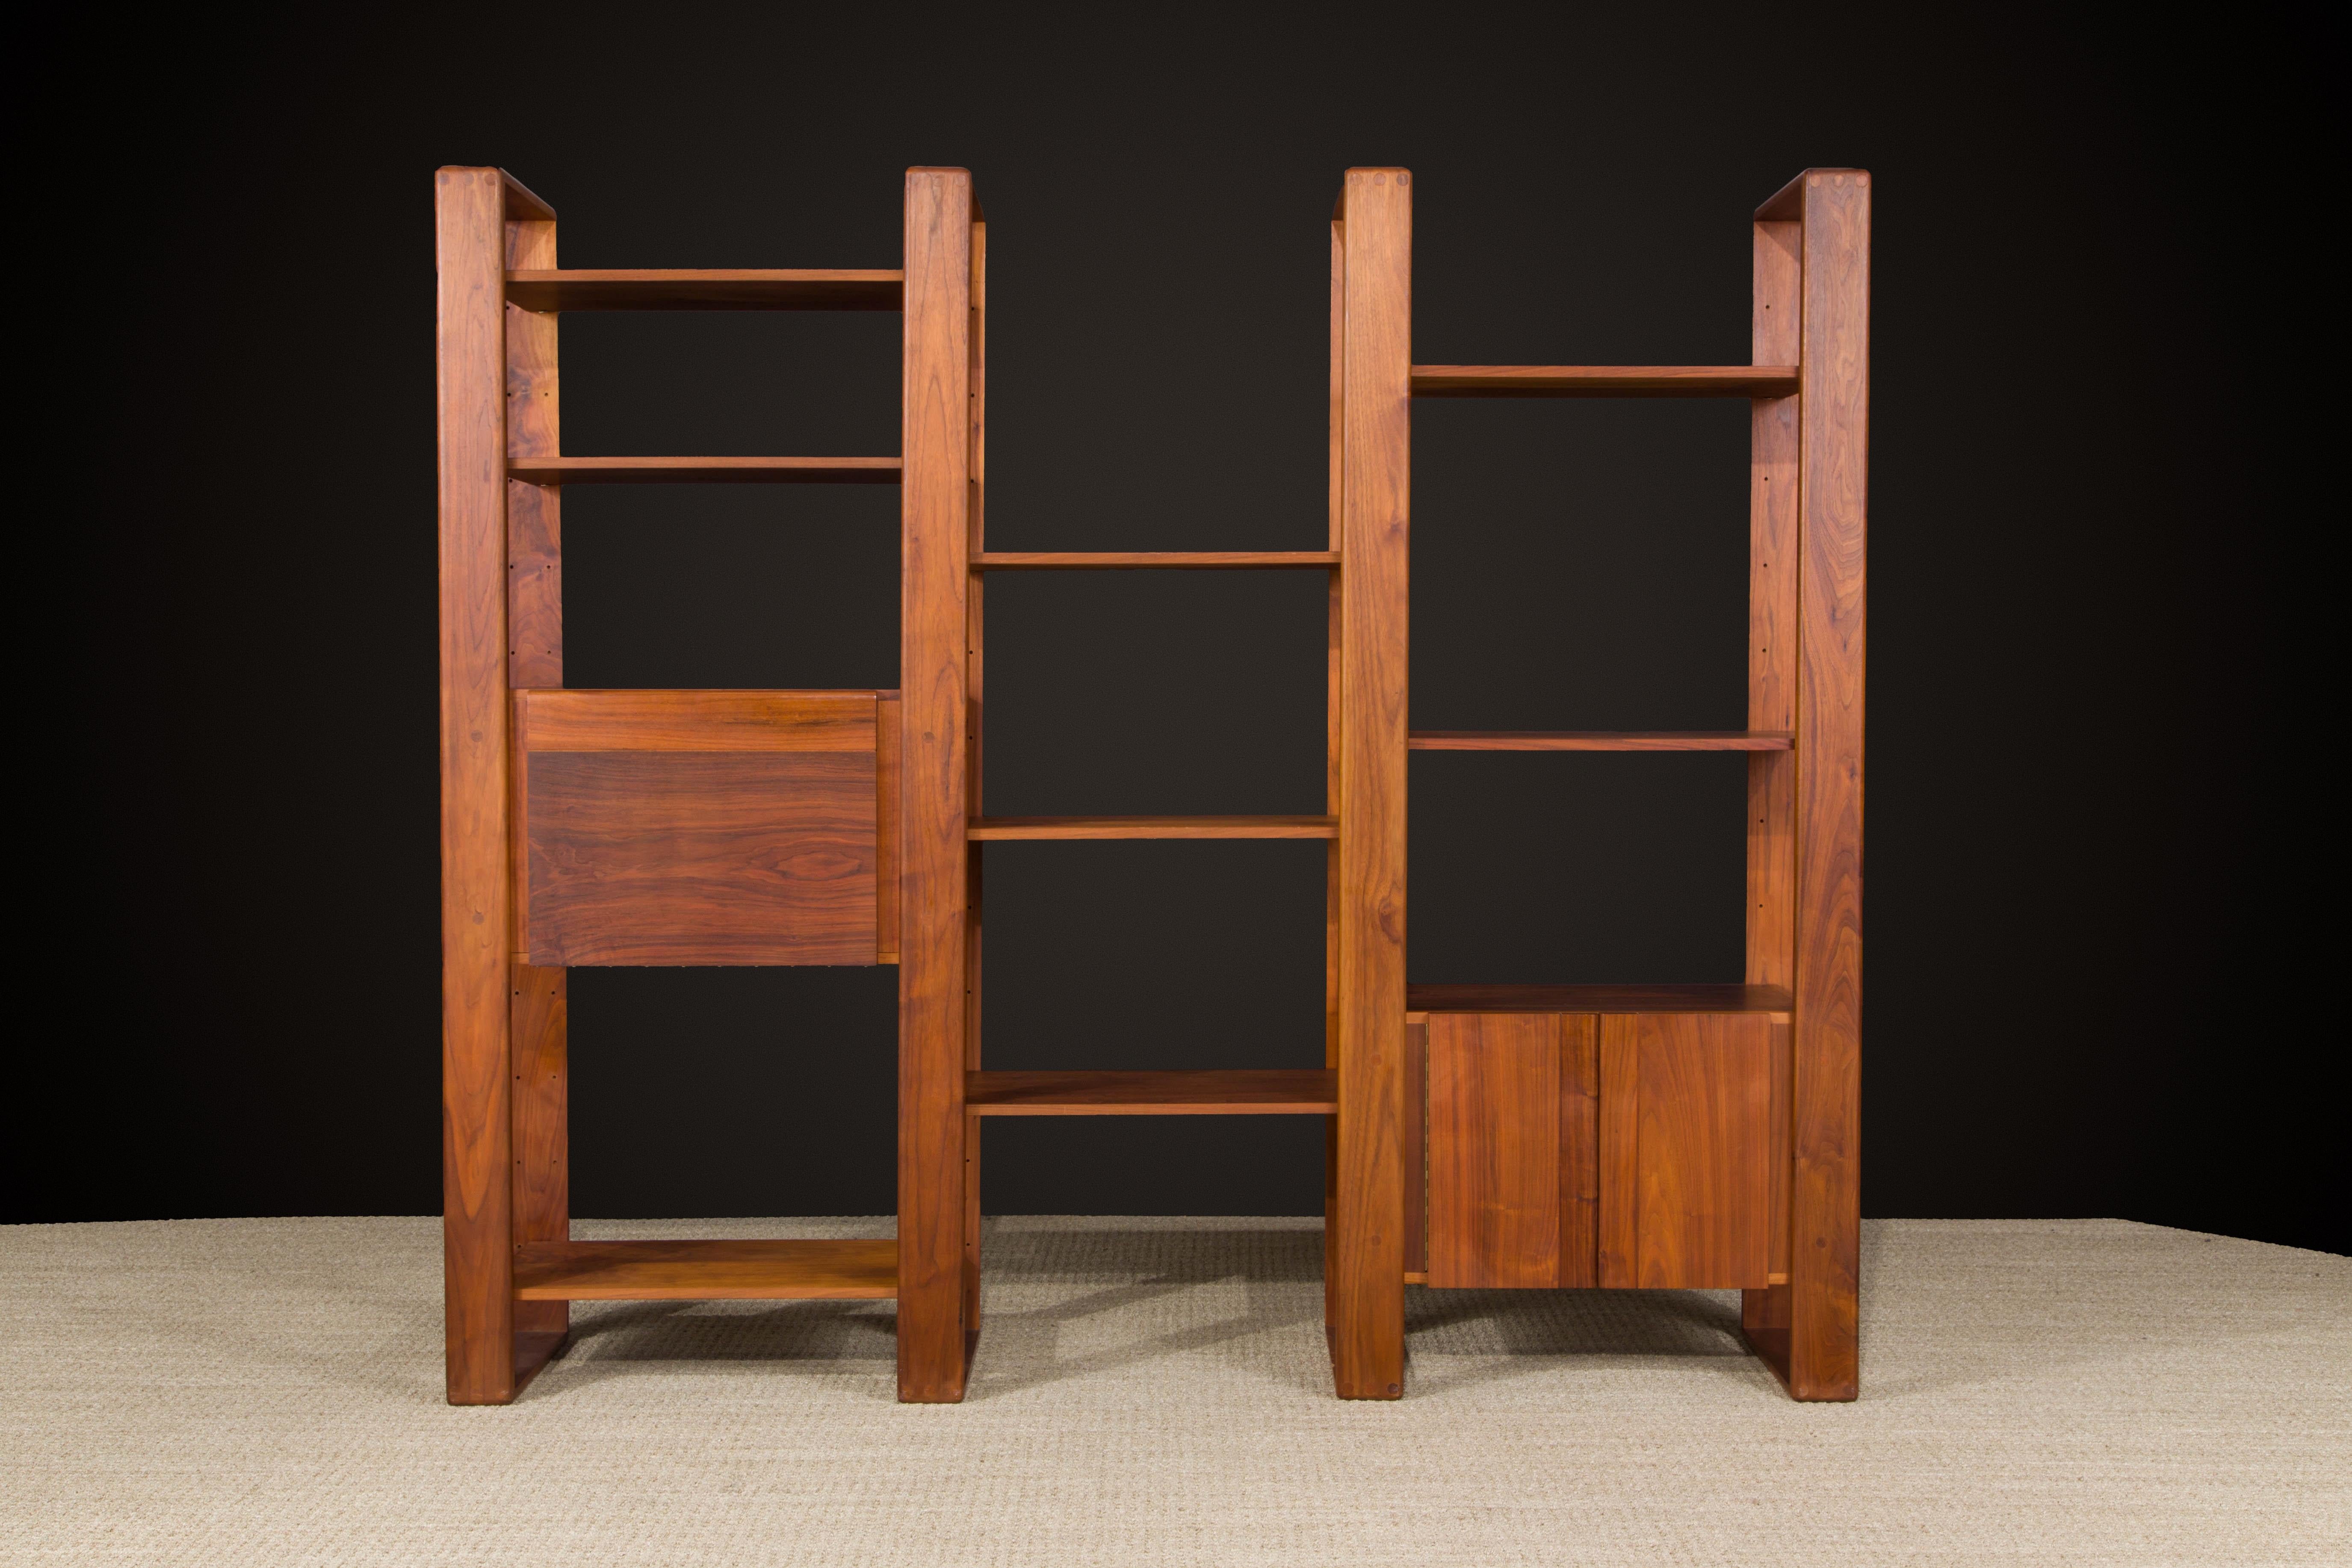 This modular bookcase is by Lou Hodges, designed and produced in California in the 1970s through early 1980s. You can configure this modular set in so many ways, each of the two units can be stand-alone or combined with shelves in-between to make a